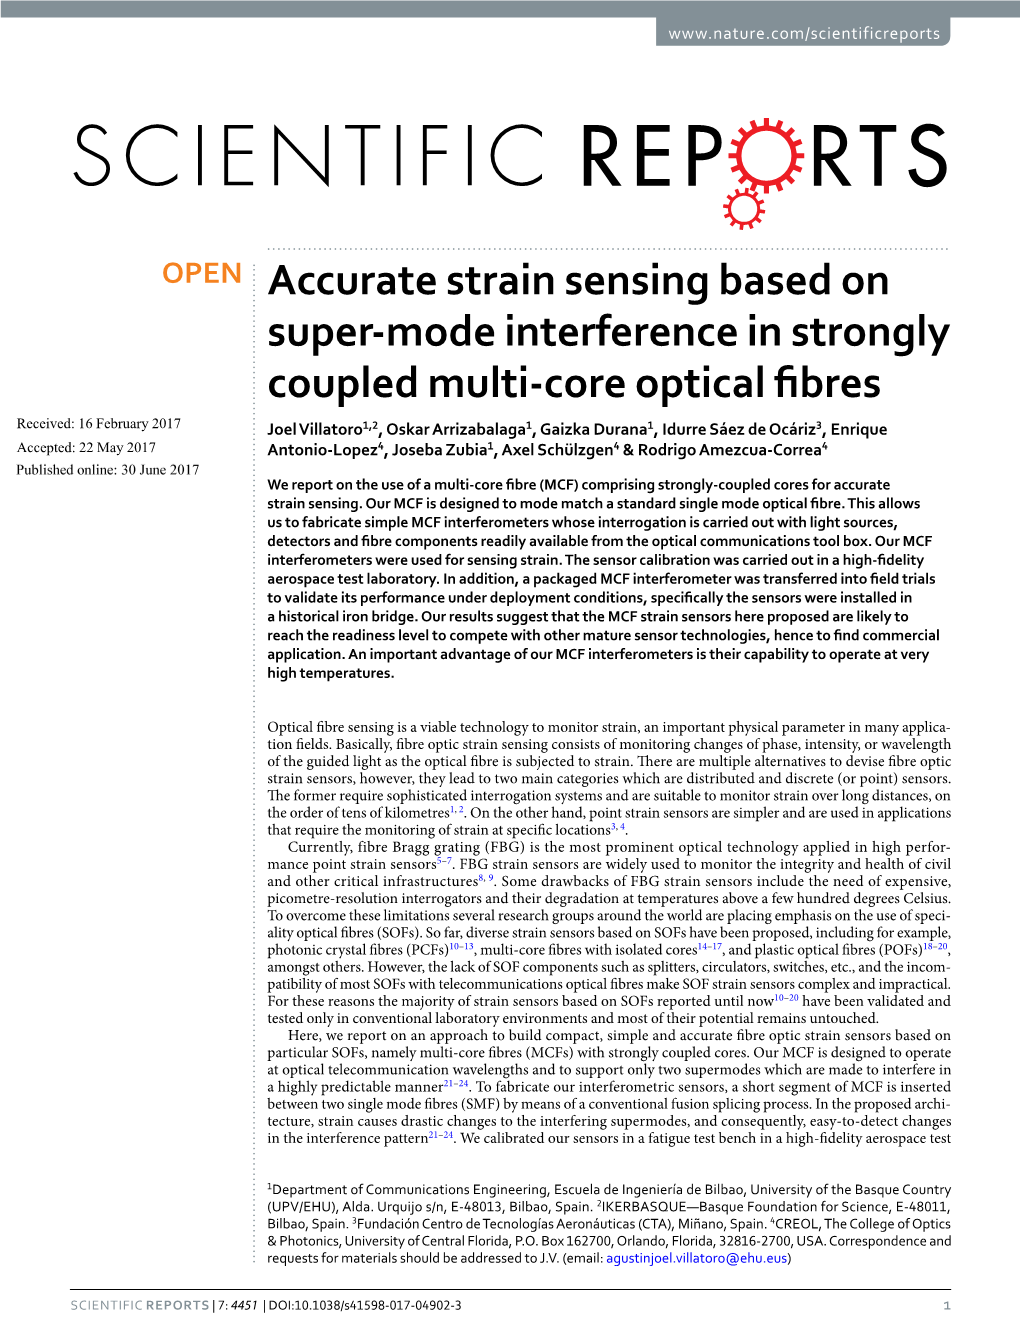 Accurate Strain Sensing Based on Super-Mode Interference In